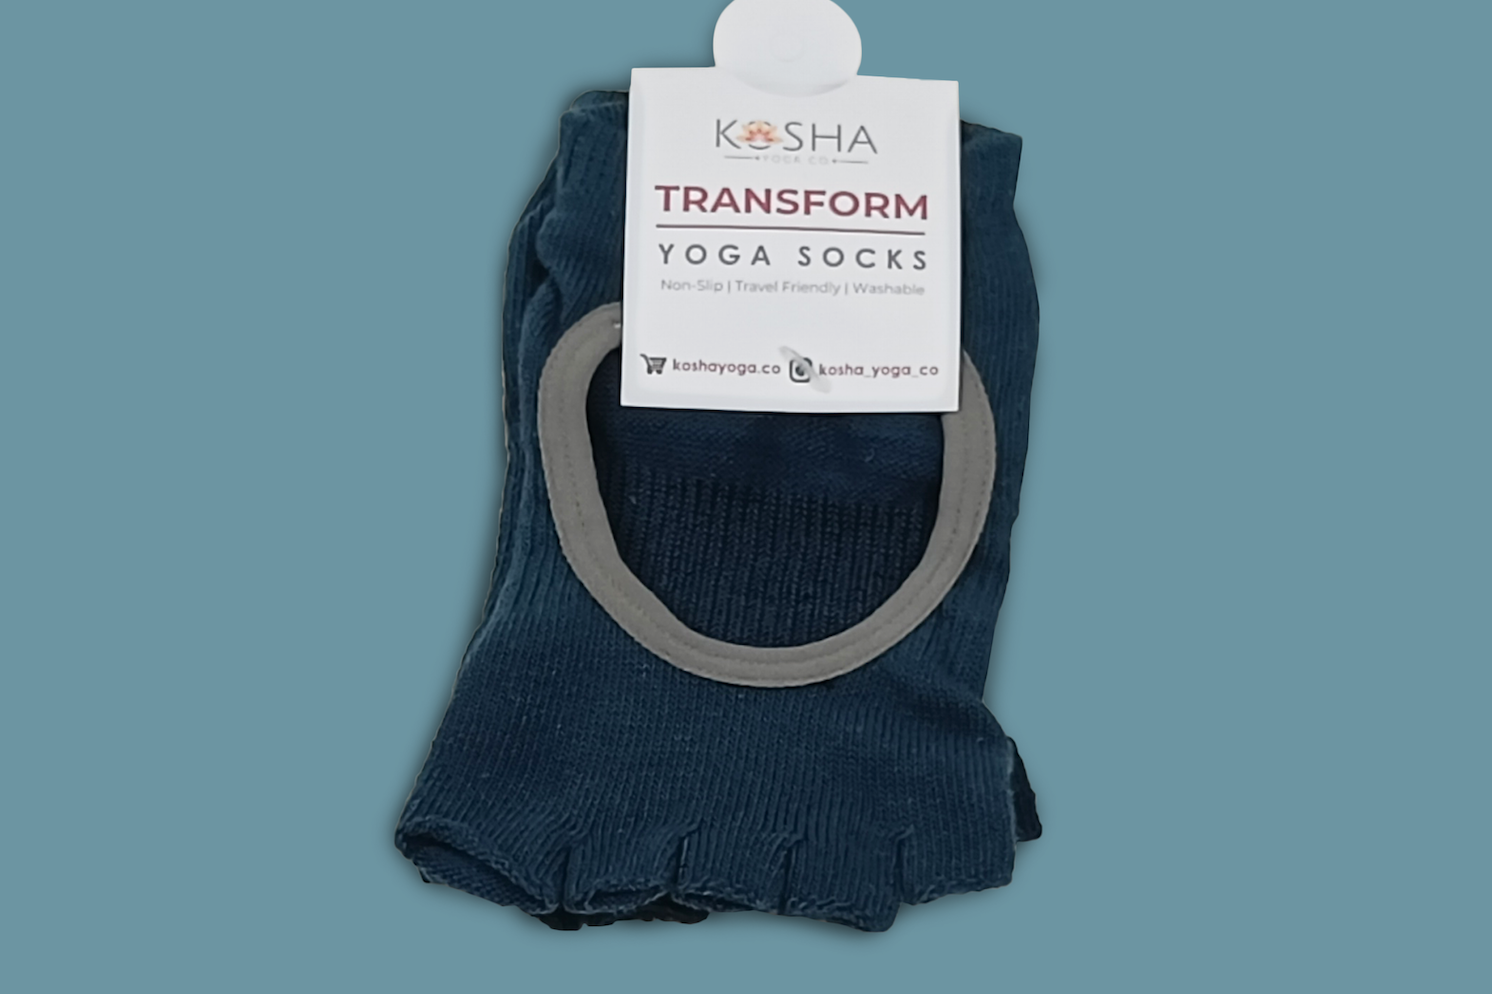 socks with anti skid silicone for travelling yogis by kosha yoga co and pilates